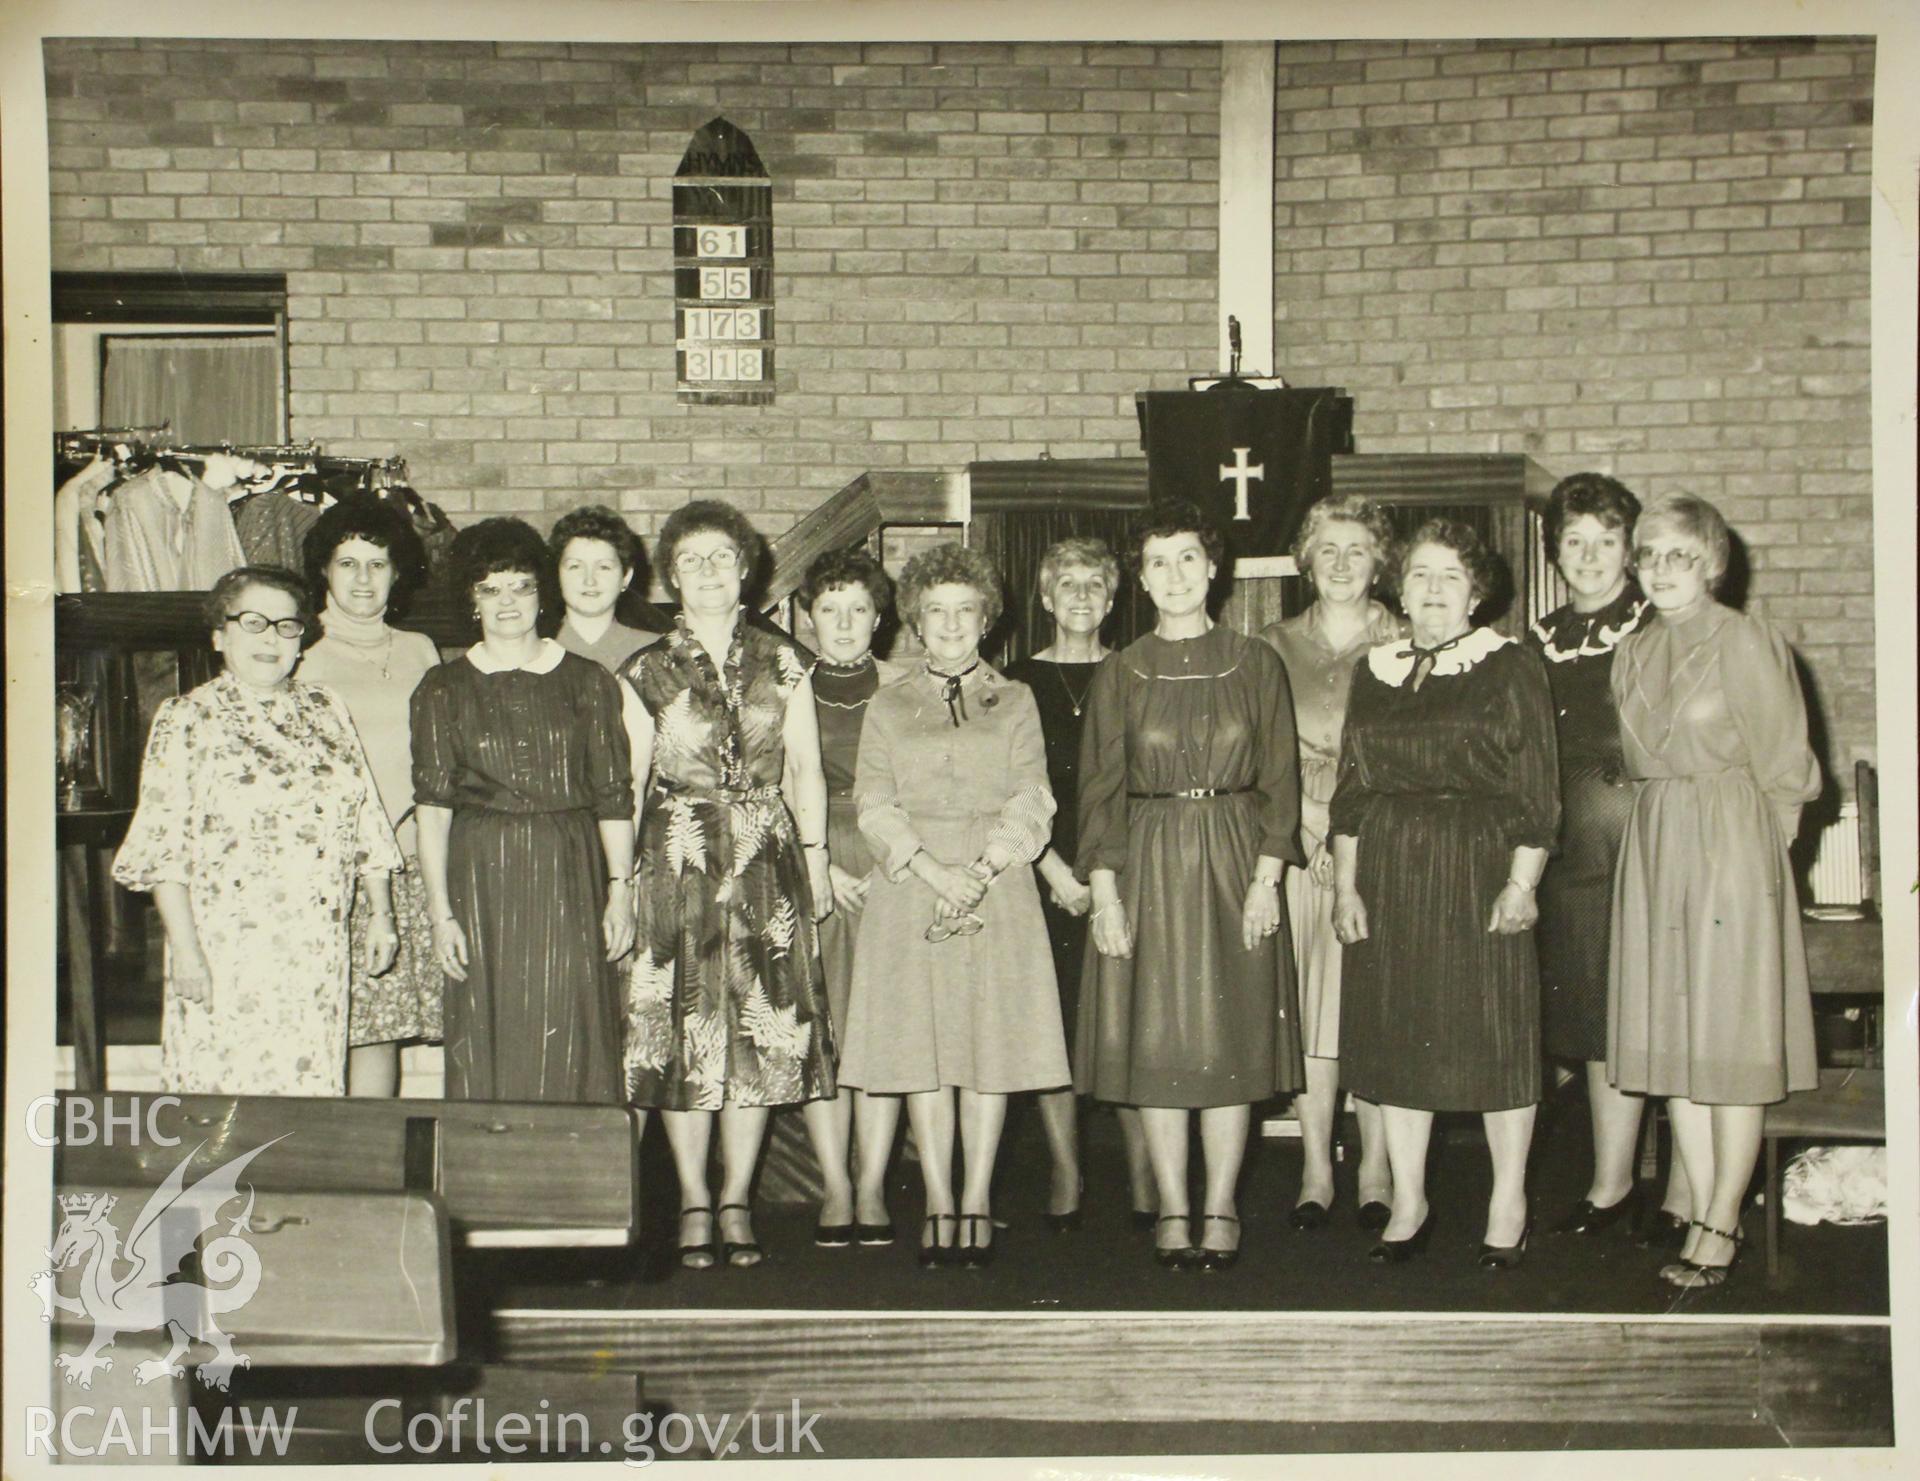 Black and white photograph showing members of the congregation of Riverside Chapel, Port Talbot. Date unknown.